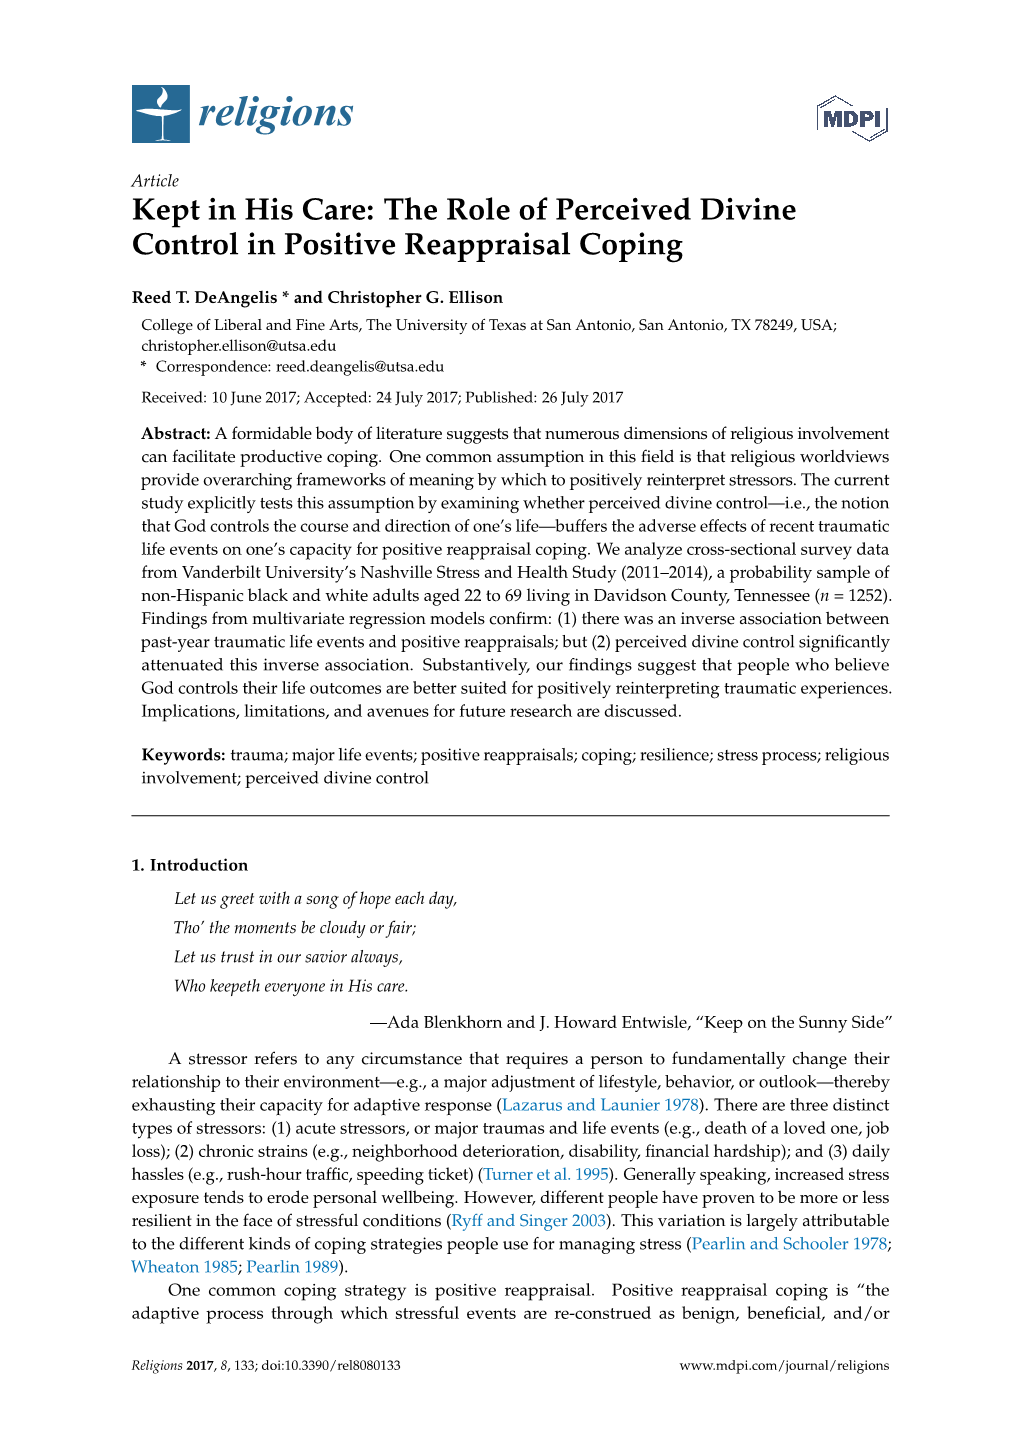 Kept in His Care: the Role of Perceived Divine Control in Positive Reappraisal Coping